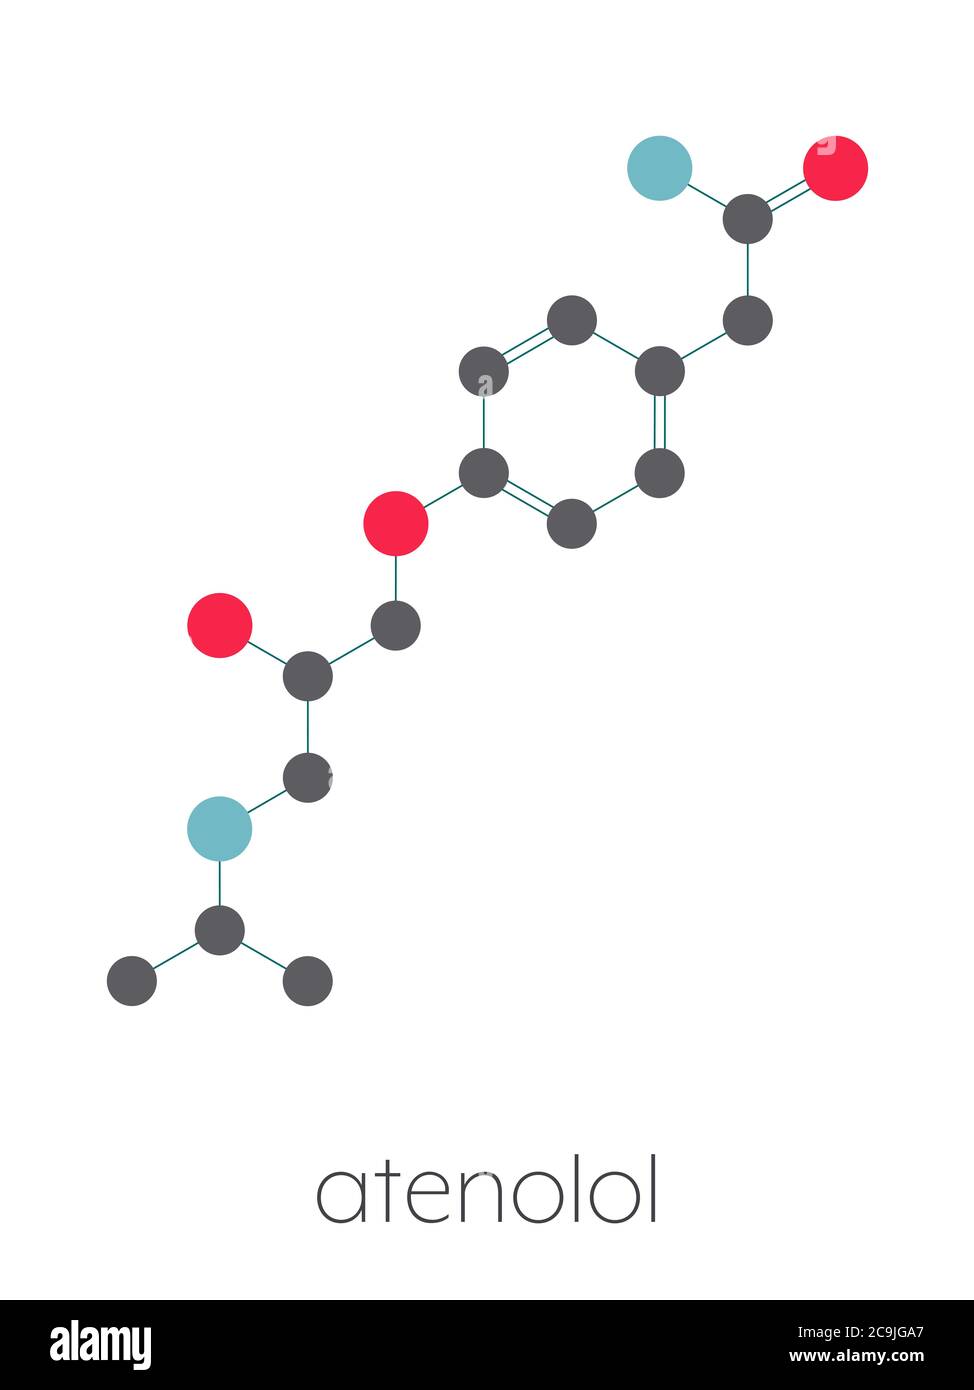 Atenolol hypertension or high blood pressure drug (beta blocker) molecule. Stylized skeletal formula (chemical structure). Atoms are shown as color-co Stock Photo